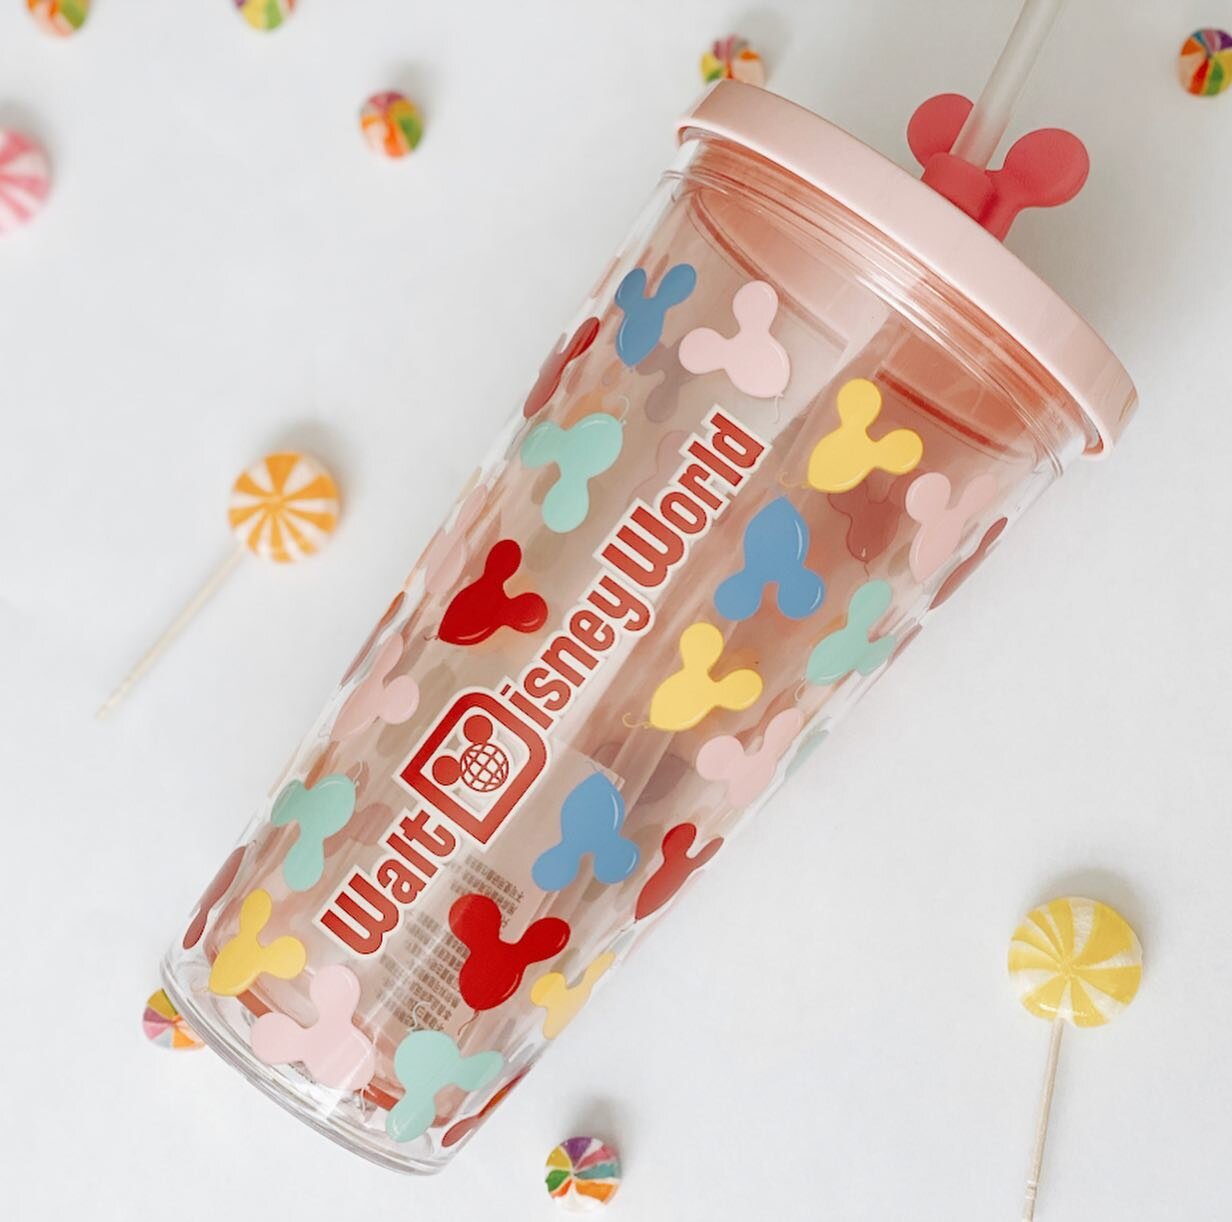 💫 G I V E A W A Y 💫 

- exclusive @waltdisneyworld tumbler
- reusable Epcot tote
- $10 Starbucks gift card to fill that tumbler with!

To enter: 
Follow me @houseofrandall 
Tag a Disney fan friend! 

Each tag is an entry (one entry per comment)

Ad